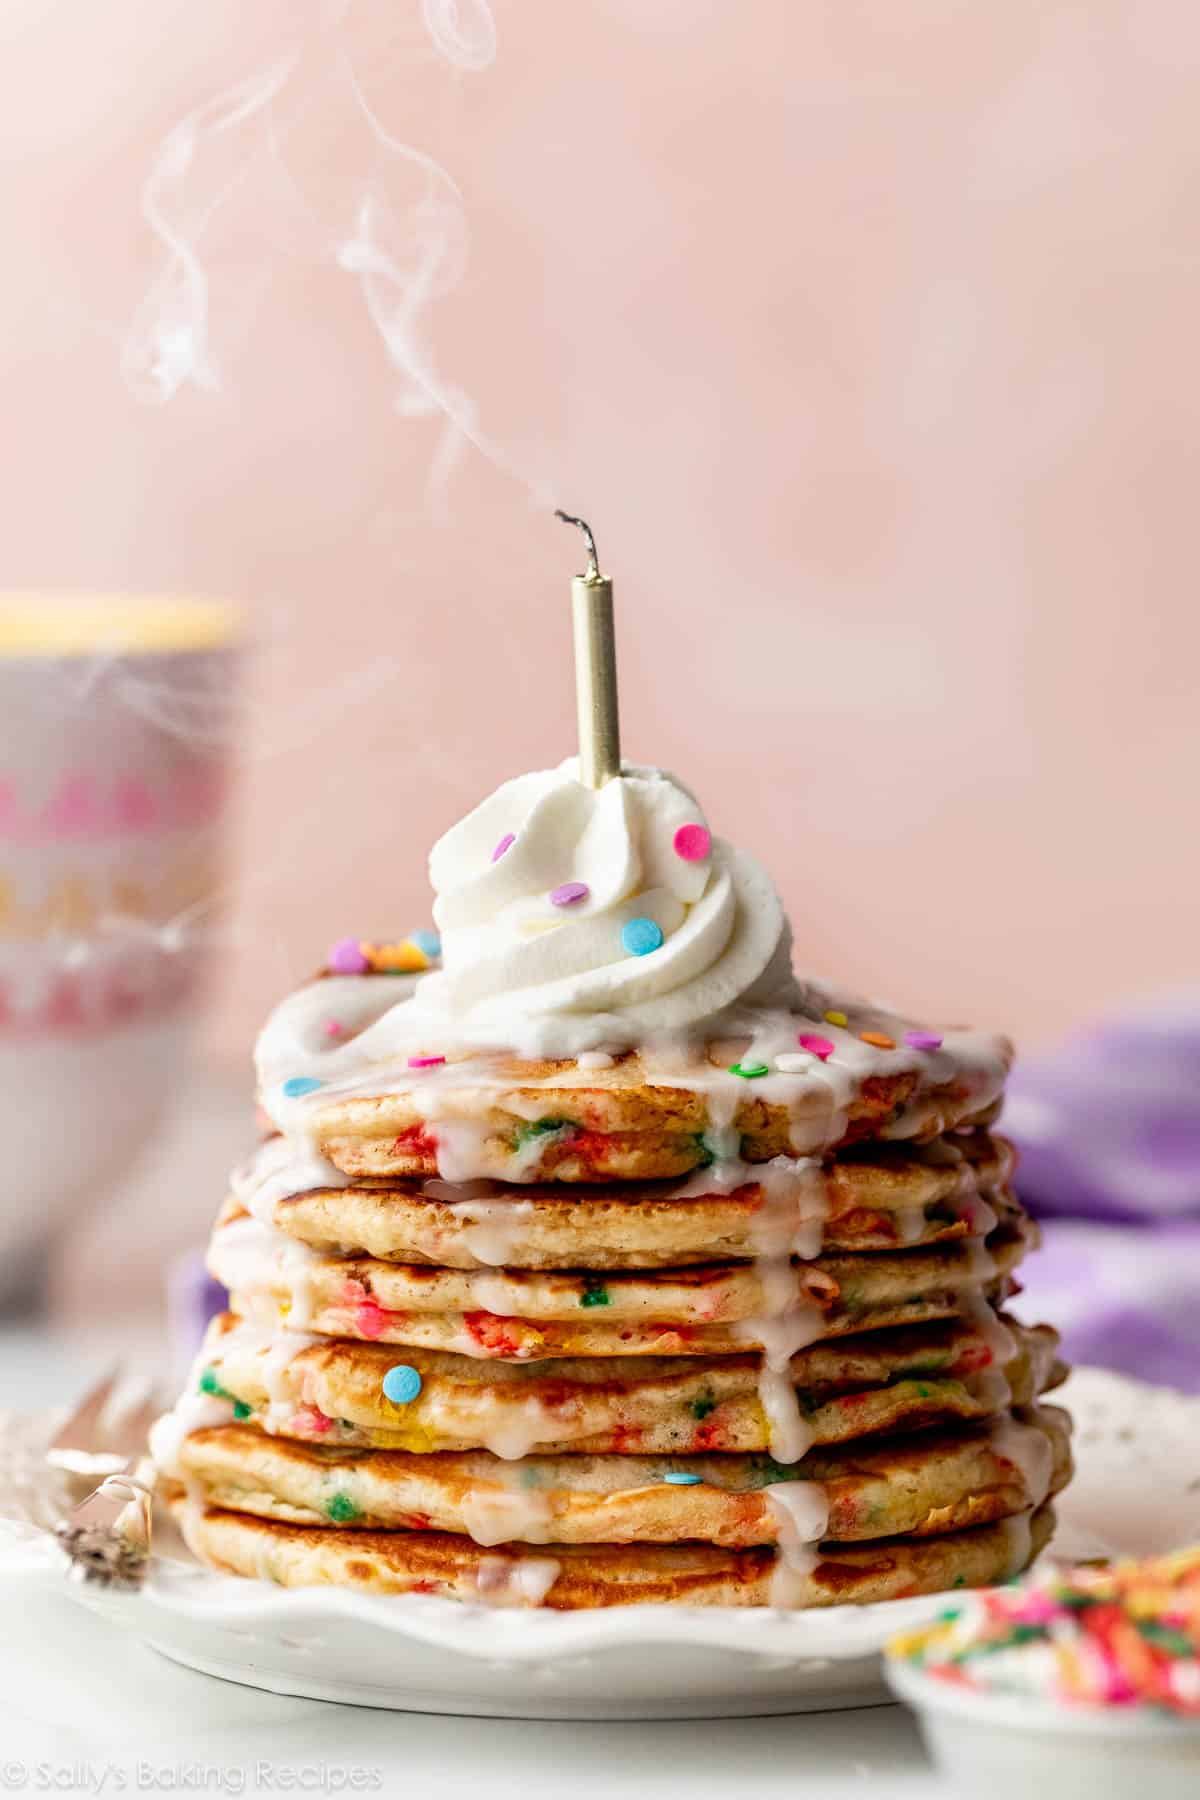 stack of birthday cake pancakes with icing dripping down the sides, whipped cream on top, and a candle on top that is smoking from just being blown out.